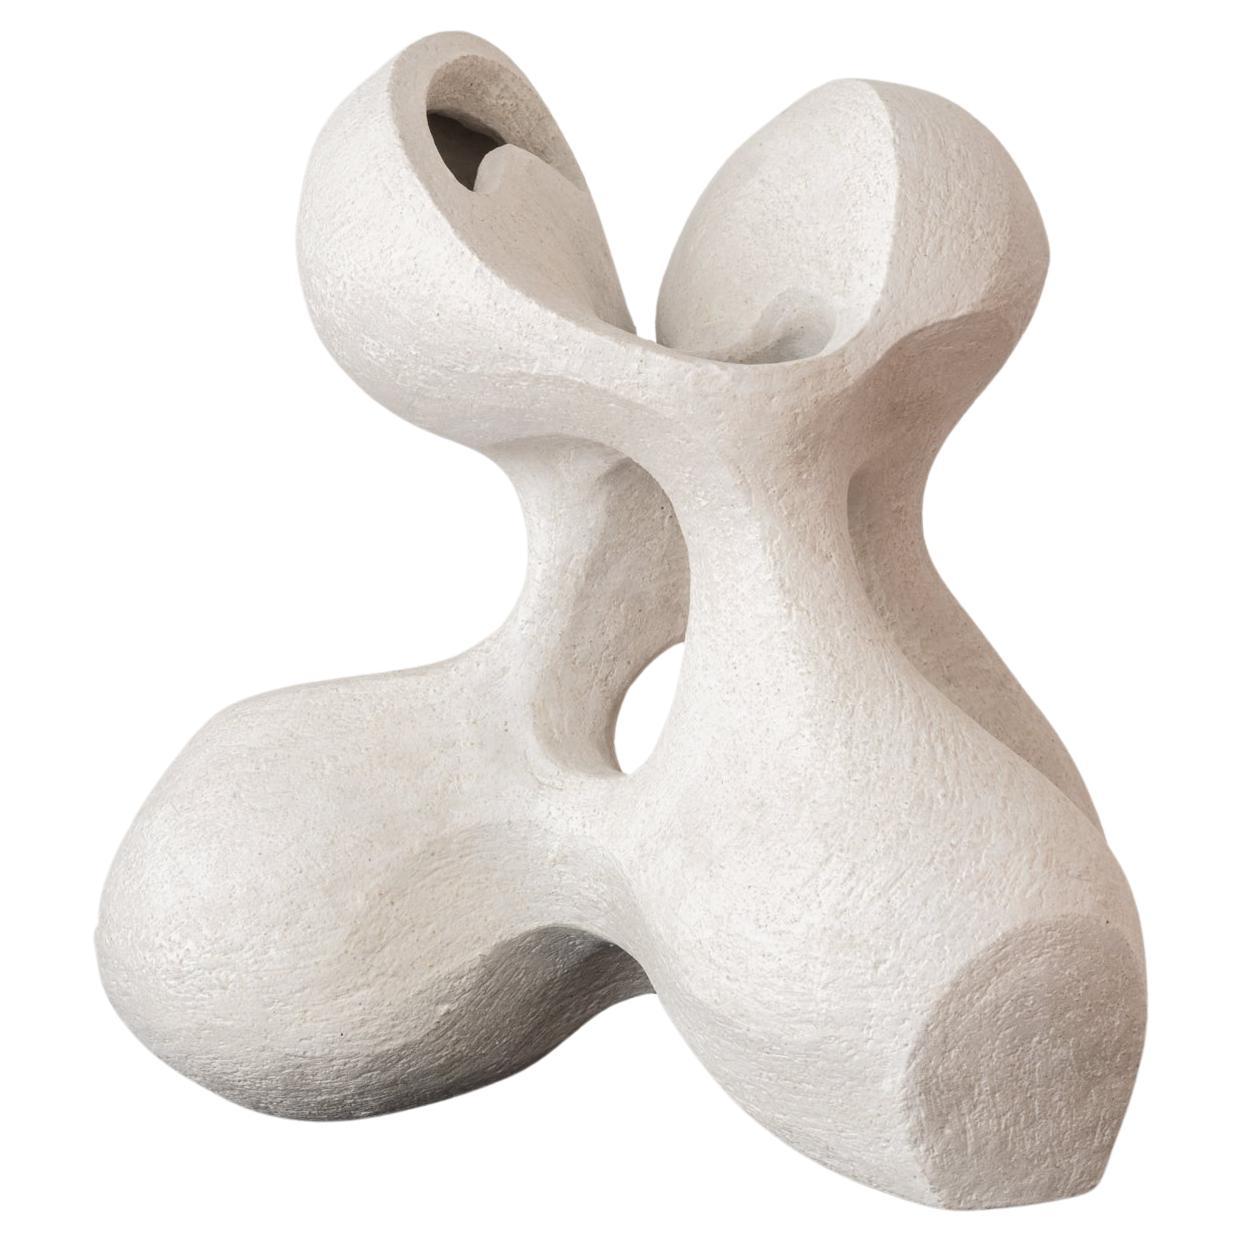 Abstract Tabletop Sculpture in Contemporary Organic White Ceramic